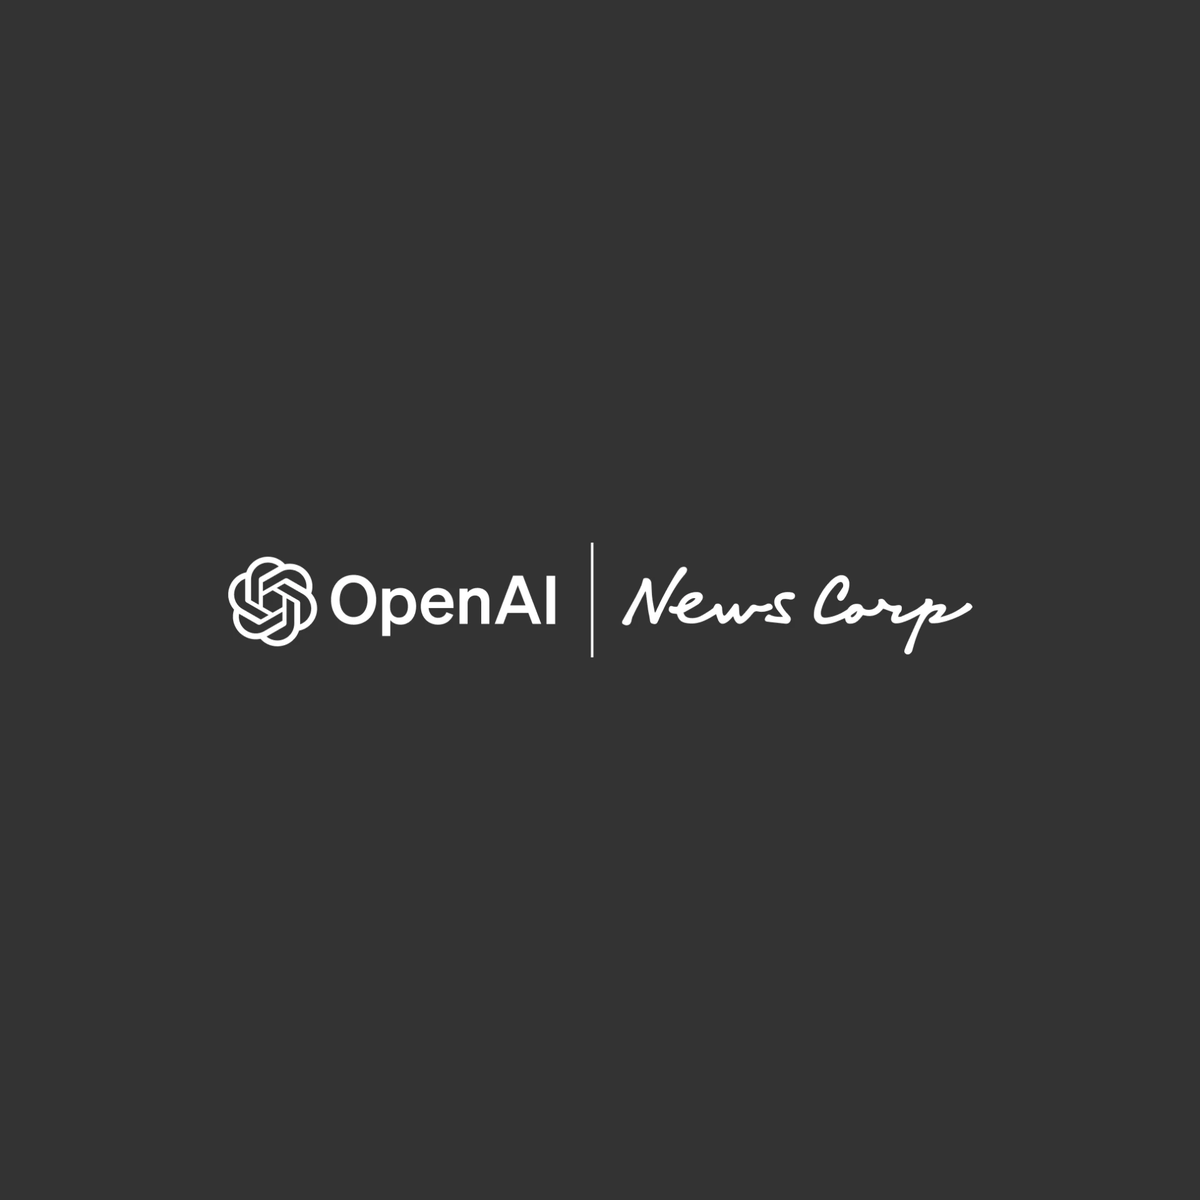 today in AI: 1/ OpenAI has signed a deal with News Corp. News Corp owns publications like @WSJ, @nypost, @MarketWatch and more. The deal could be worth over $250M over 5 years. The estimates for @OpenAI’s previous deals with Axel Springer and @FT max out at $10M a year. 2/